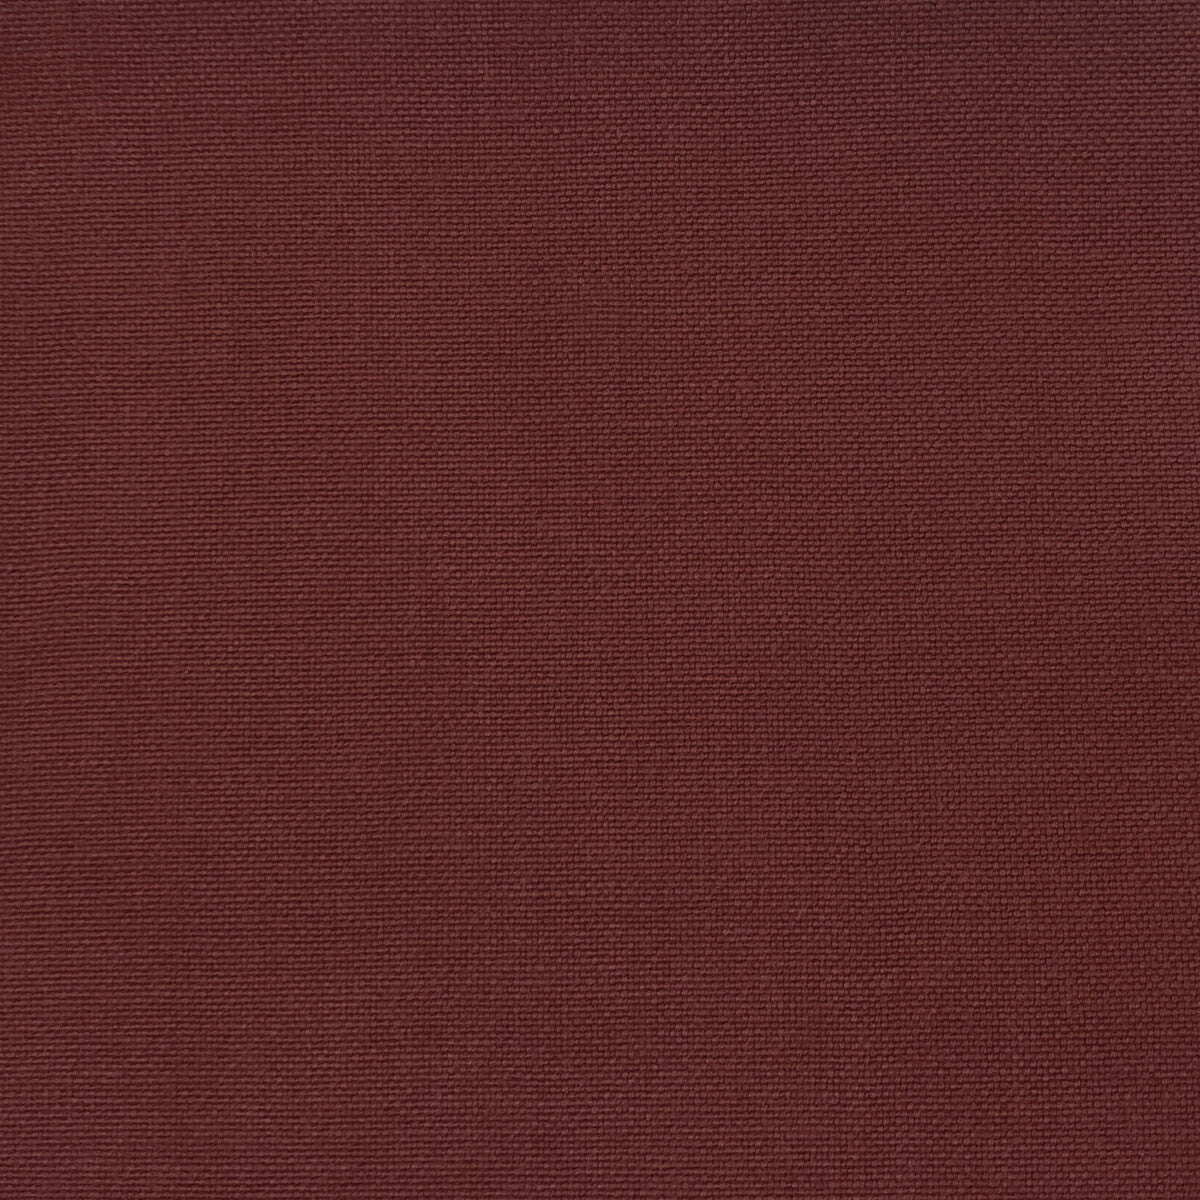 Palma fabric in vino color - pattern GDT5688.025.0 - by Gaston y Daniela in the Gaston Maiorica collection